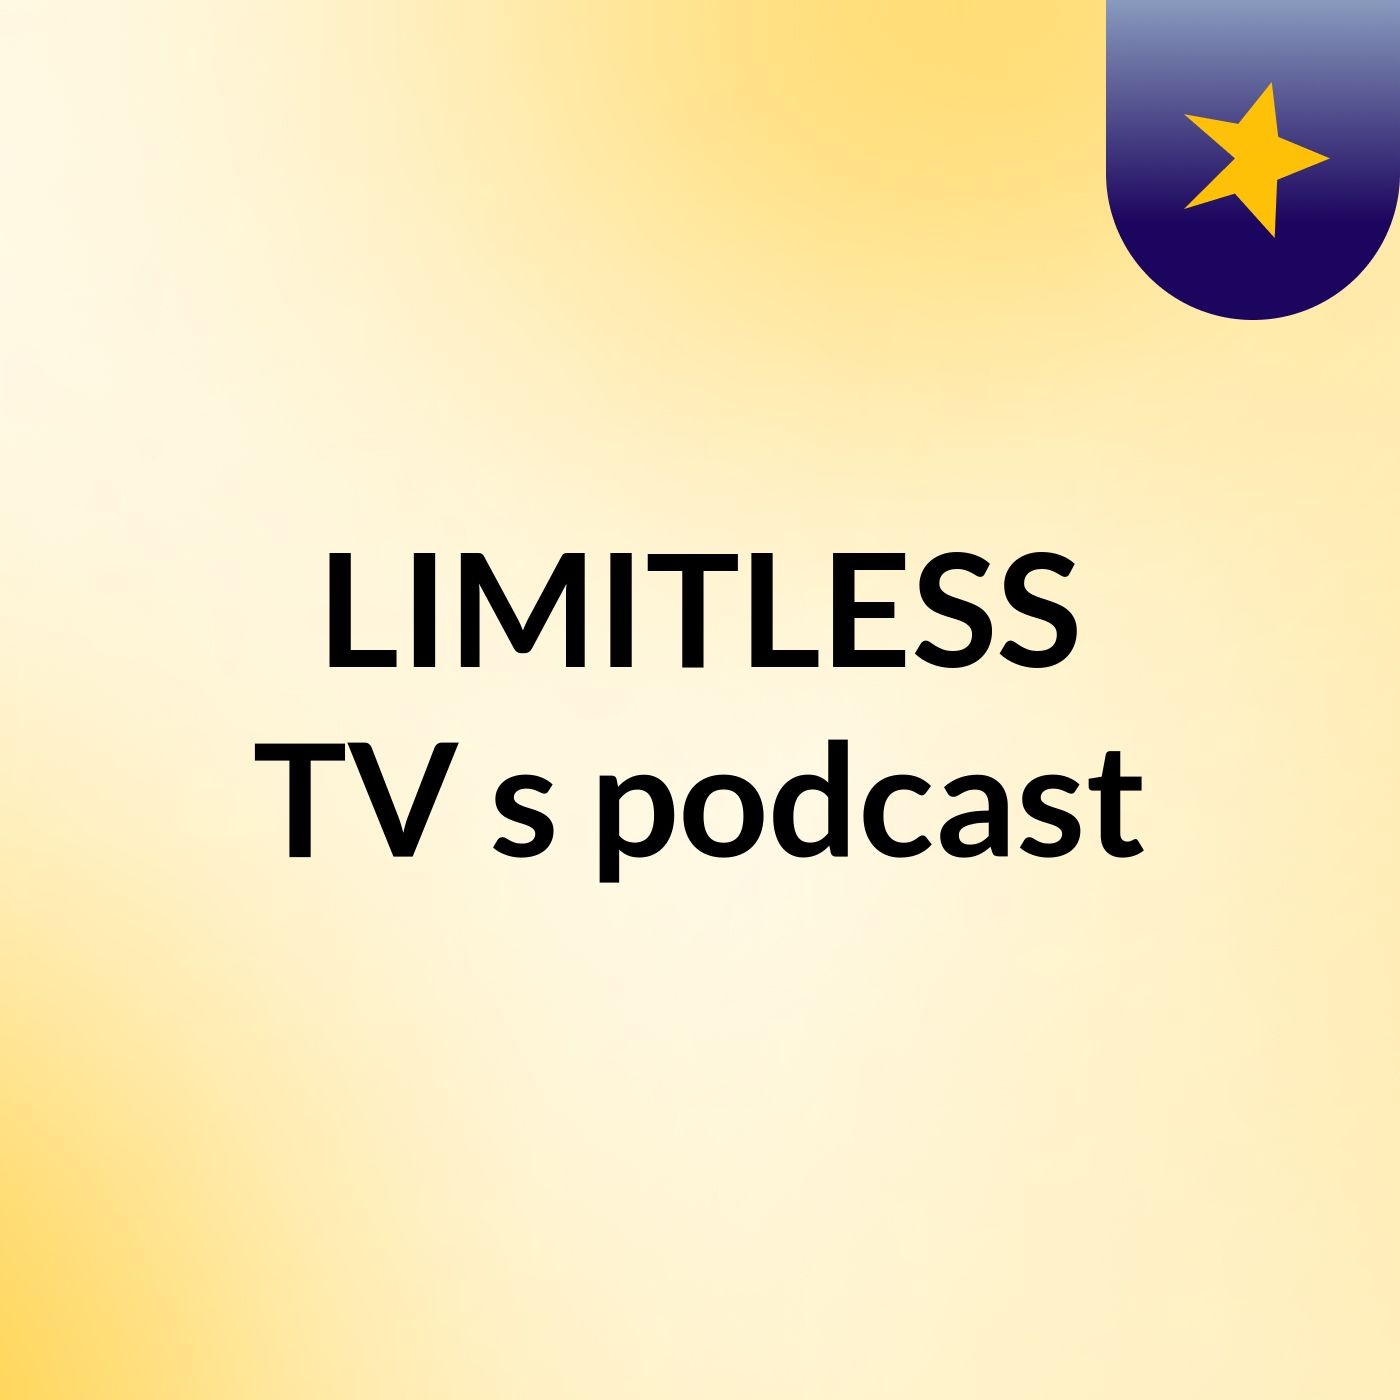 LIMITLESS TV's podcast